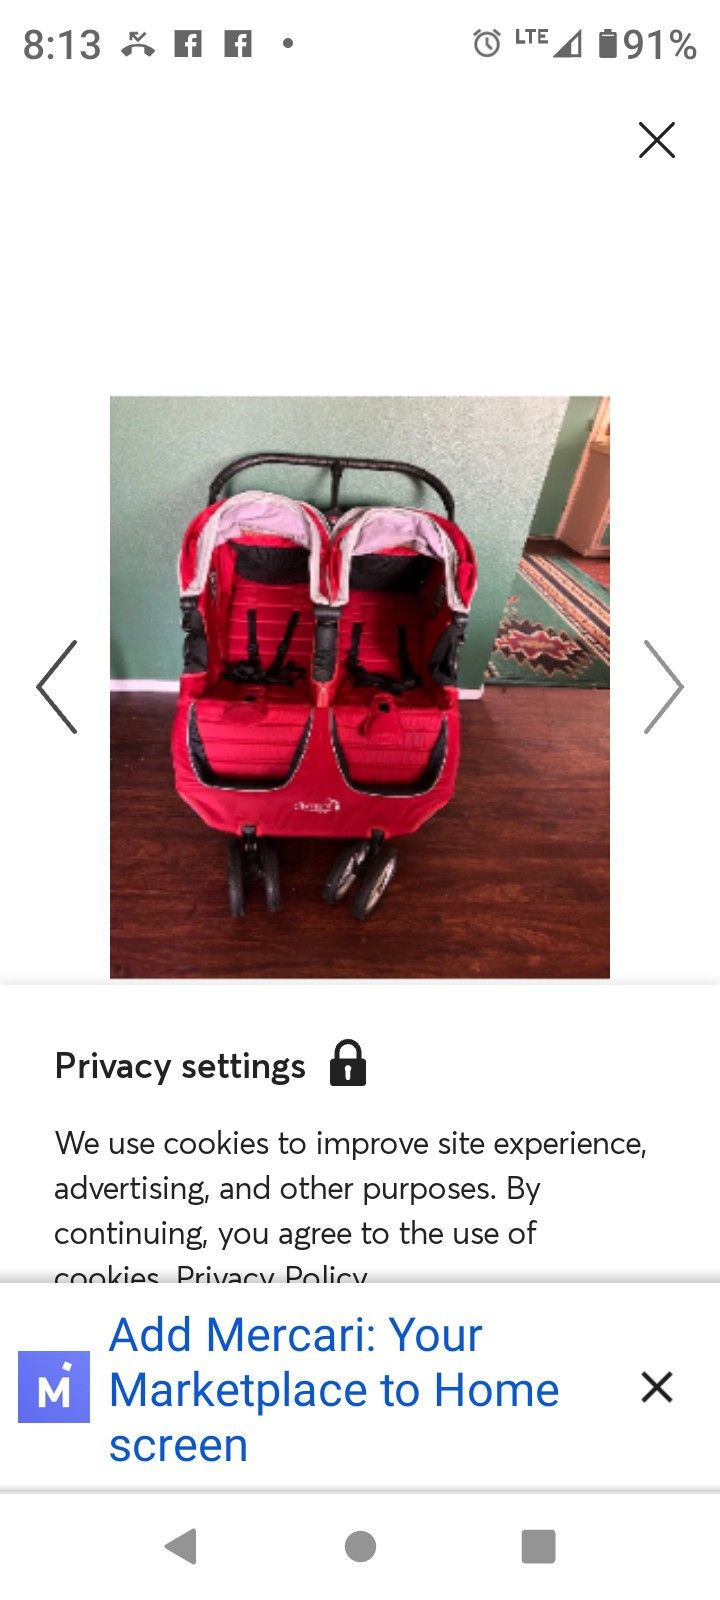 Red Joovy  Double Stroller, Two Place, Two Children,  Works Great